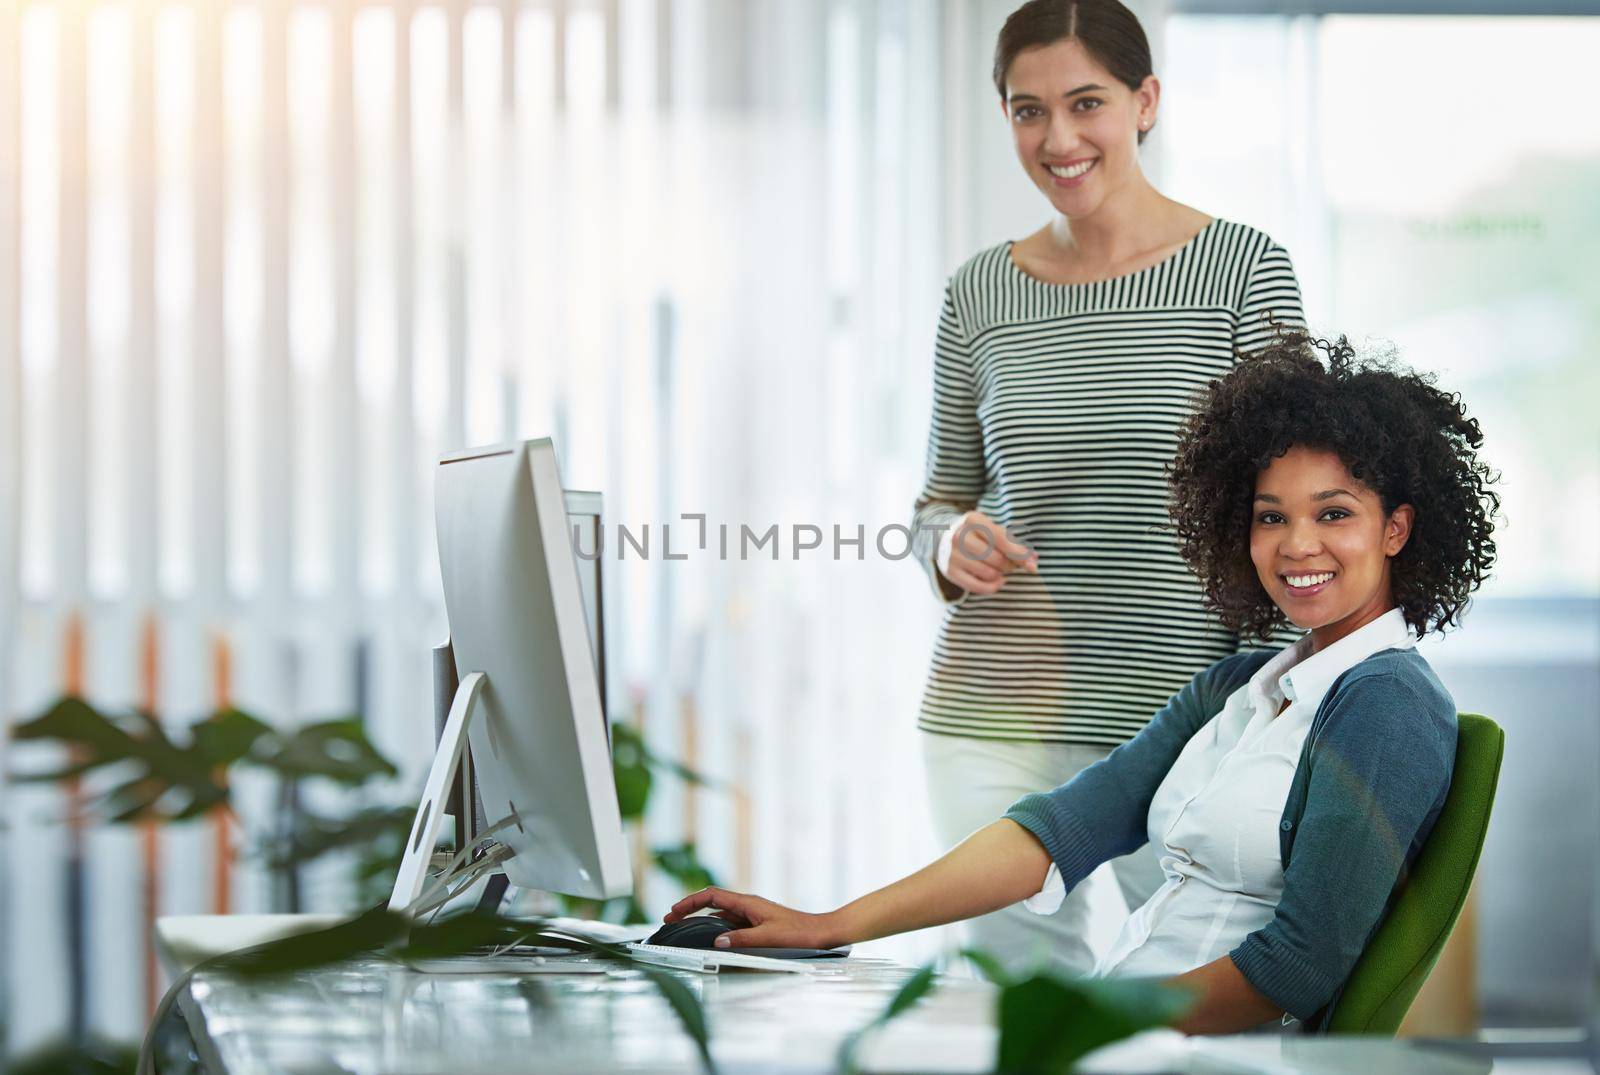 Trainee, intern or new employee with her manager, supervisor or human resources manager in the office. Portrait of happy, smiling and ambitious business women and colleagues at a desk at work.